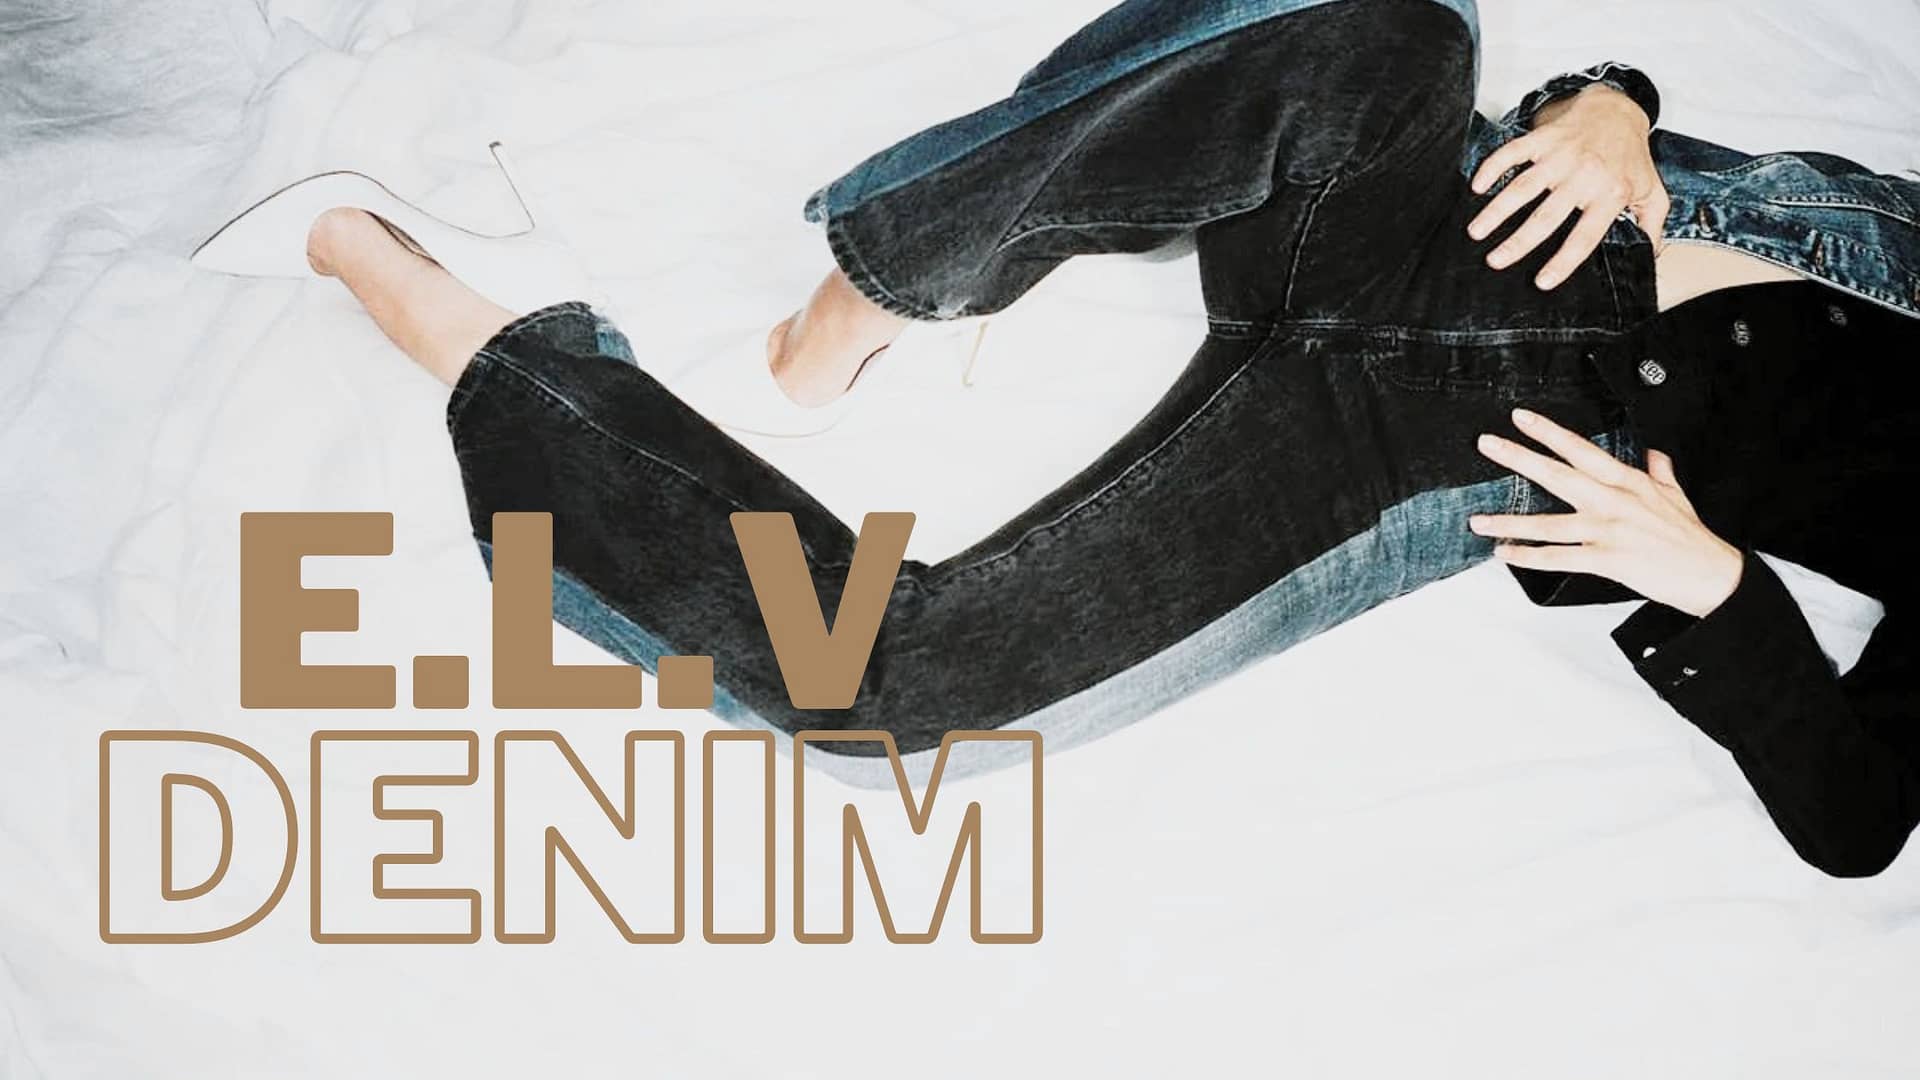 ELV Denim – All the Denim you need in Sustainability